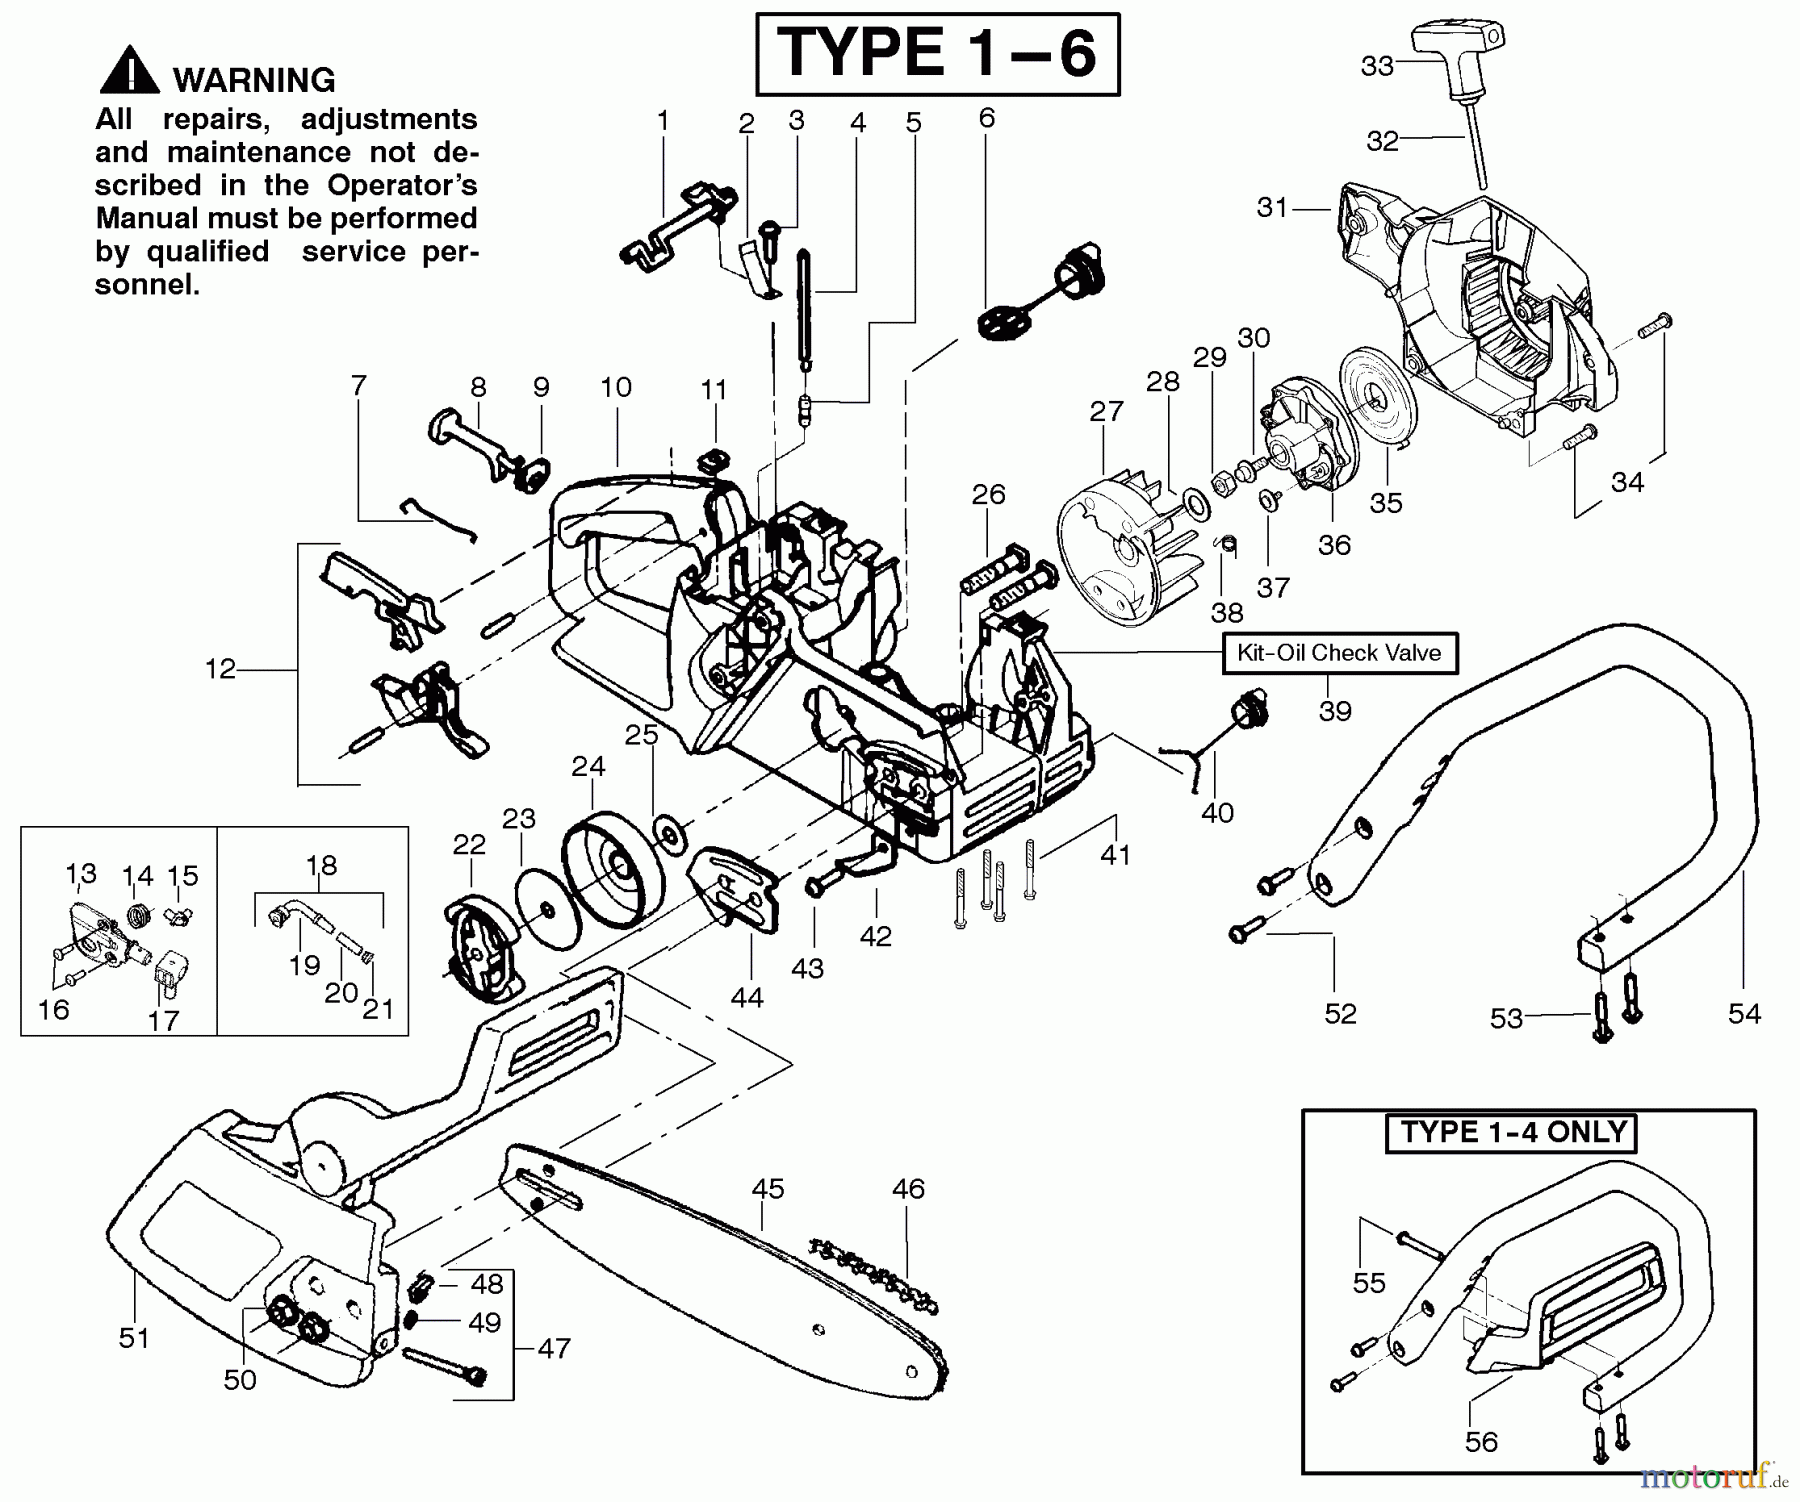  Poulan / Weed Eater Motorsägen 2050 (Type 1) - Poulan Pioneer Chainsaw Handle, Chassis & Bar Assembly Type 1-6